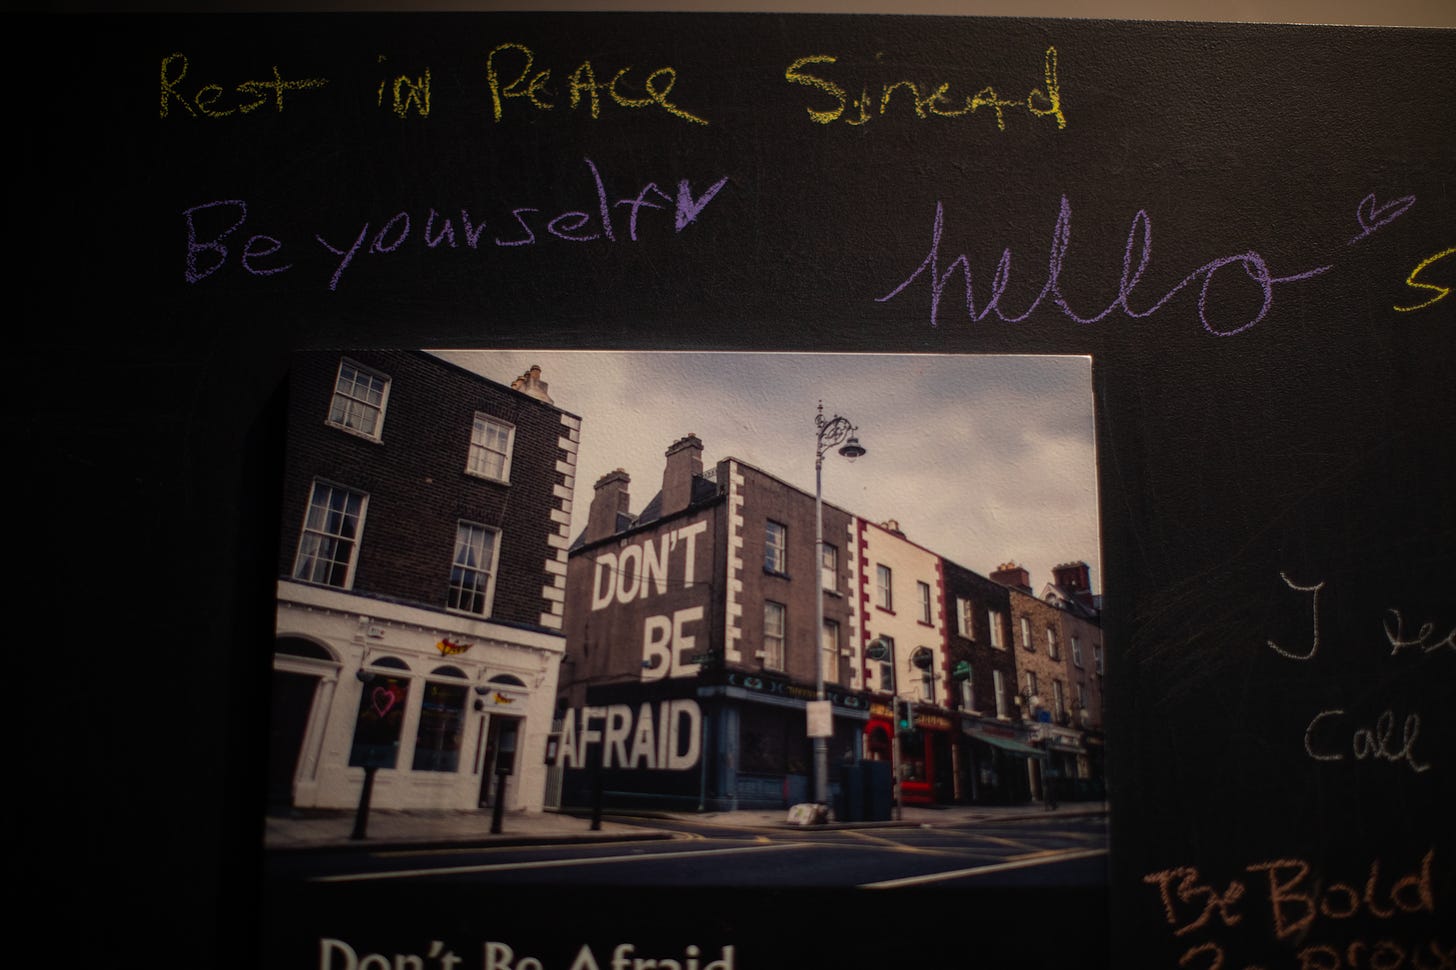 Part of the chalk wall in the final room of the Seamus Heaney "Listen Now Again" exhibit in Dublin. July 2023. A mural has been painted on the side of a Dublin shop that says "Don't be afraid." July 2023. Photo credit: Nancy Forde